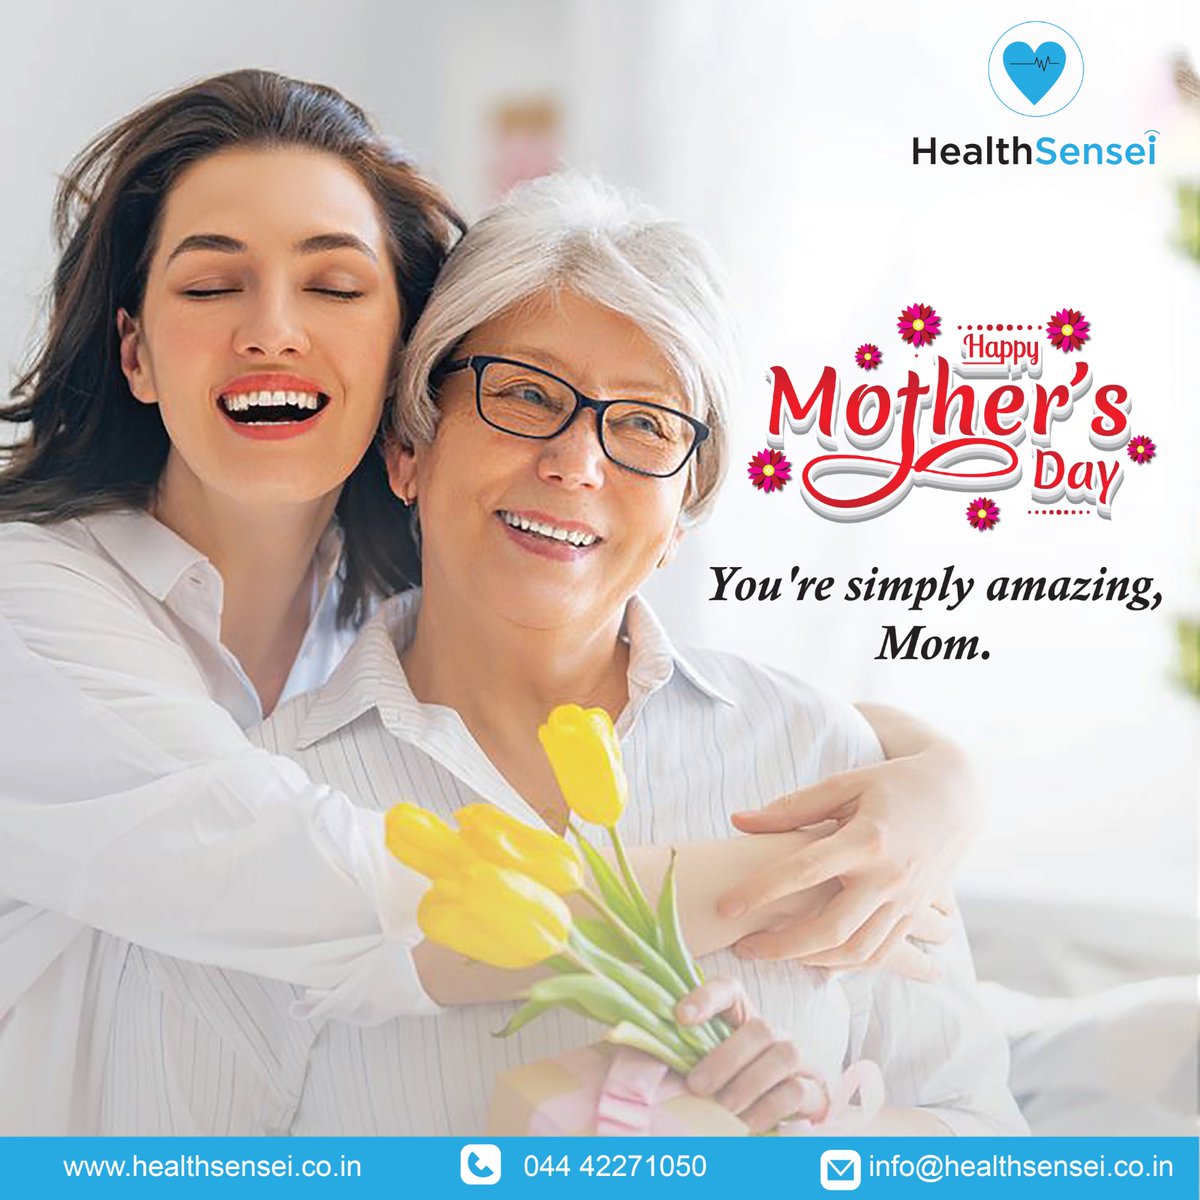 We have countless reasons to celebrate mothers, and today is one of them.

Happy Mother’s Day!

#mothersday #mother #mom #womenempowerment #womenempoweringwomen #womensupportingwomen #women #selfhealing #selfhelp #personalgrowth #personaldevelopment #healthsensei #motherhood